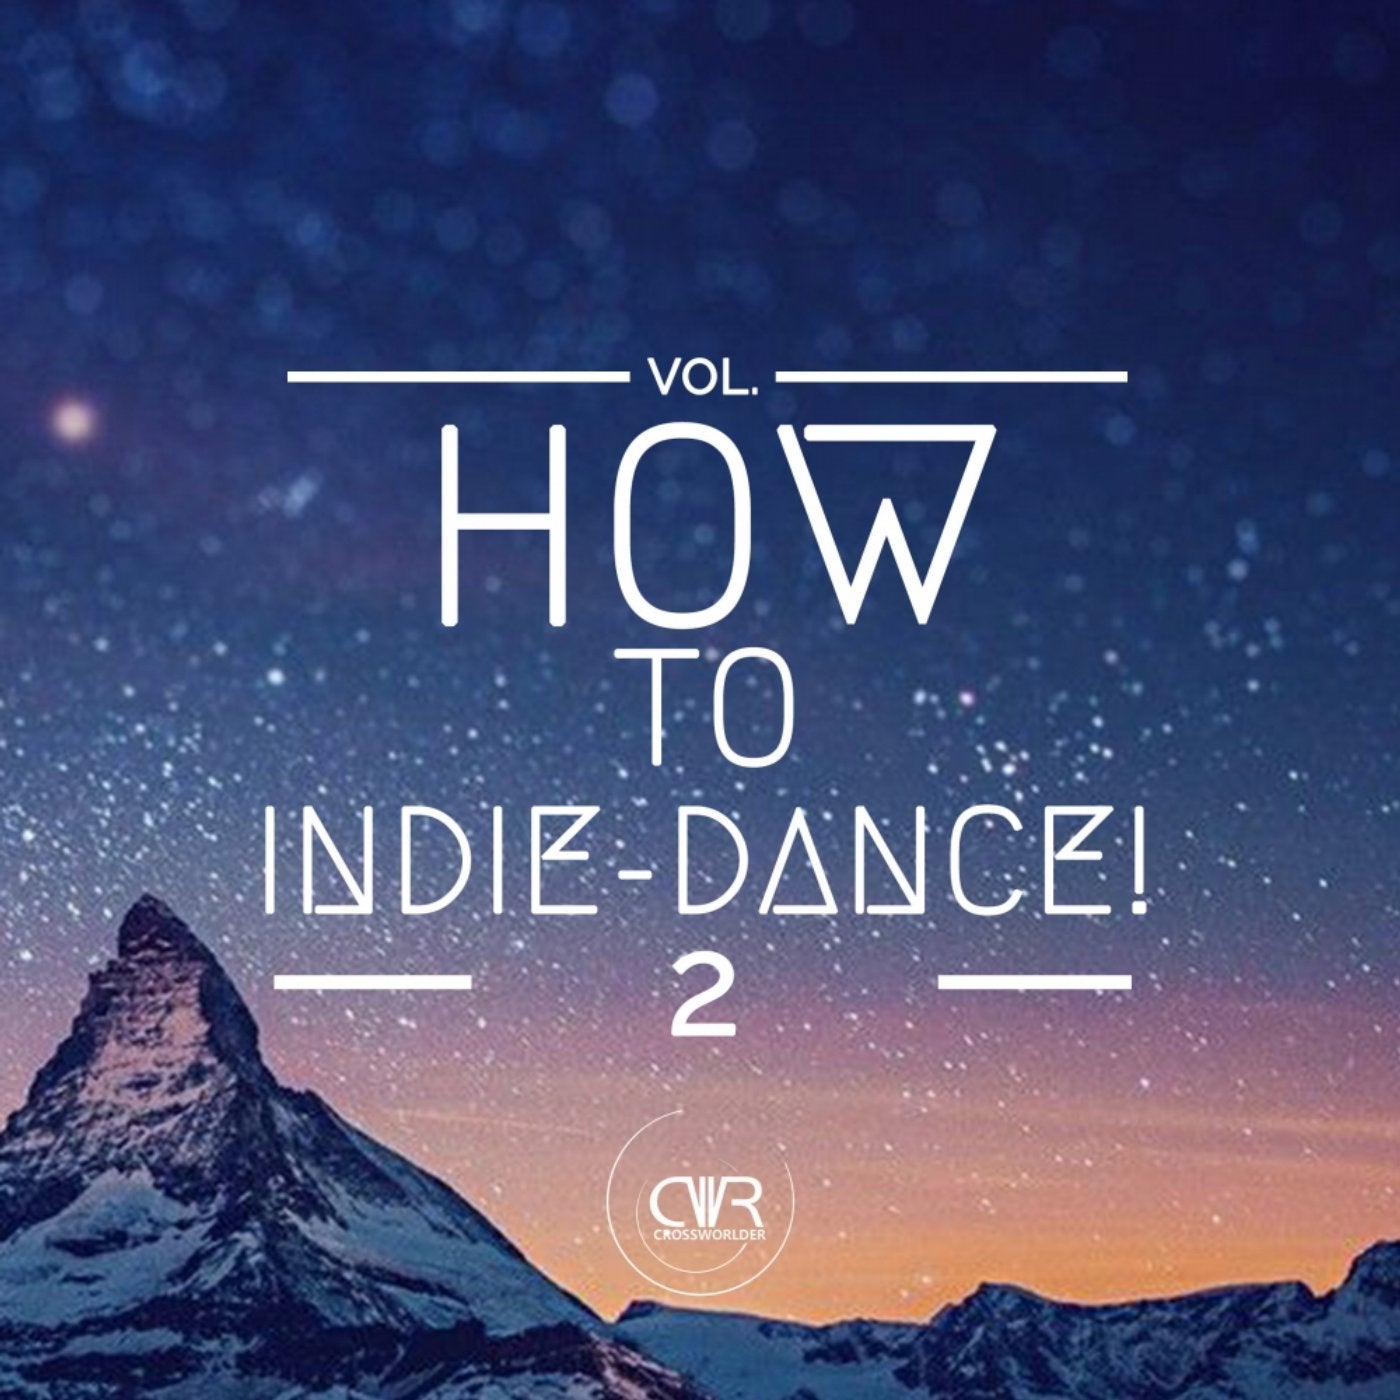 How To Indie-Dance!, Vol. 2